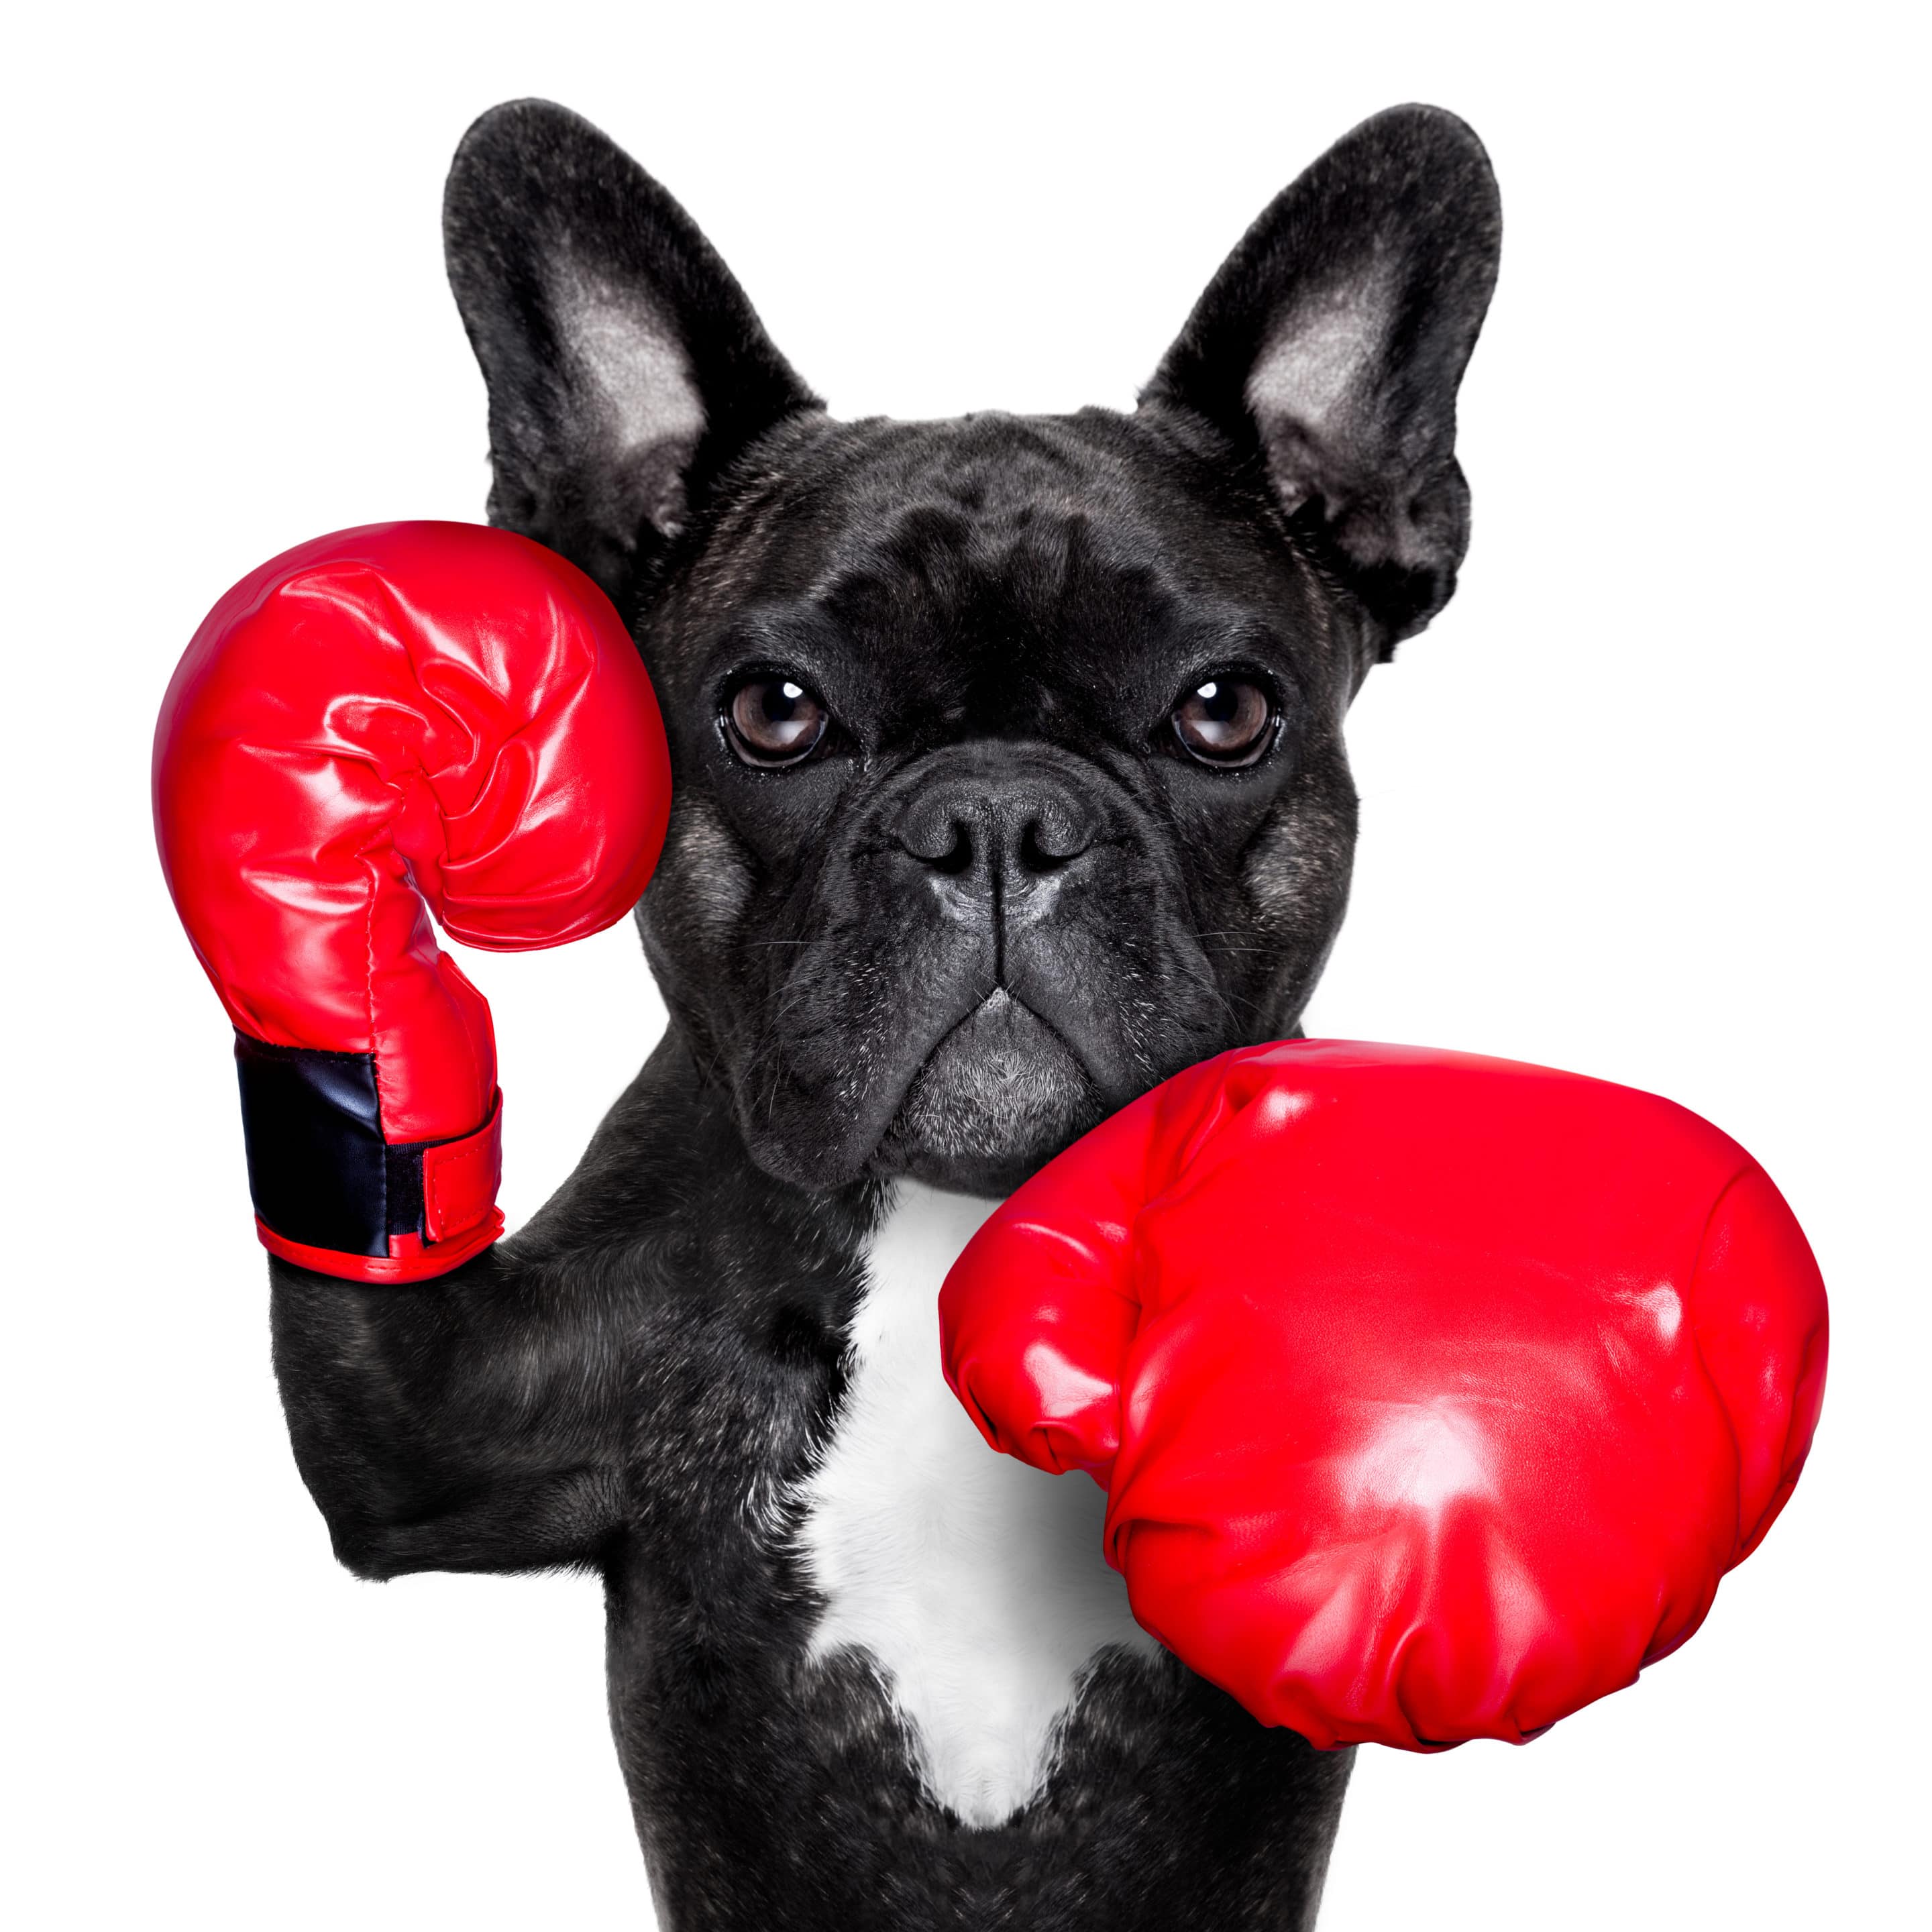 Dog with boxing gloves on